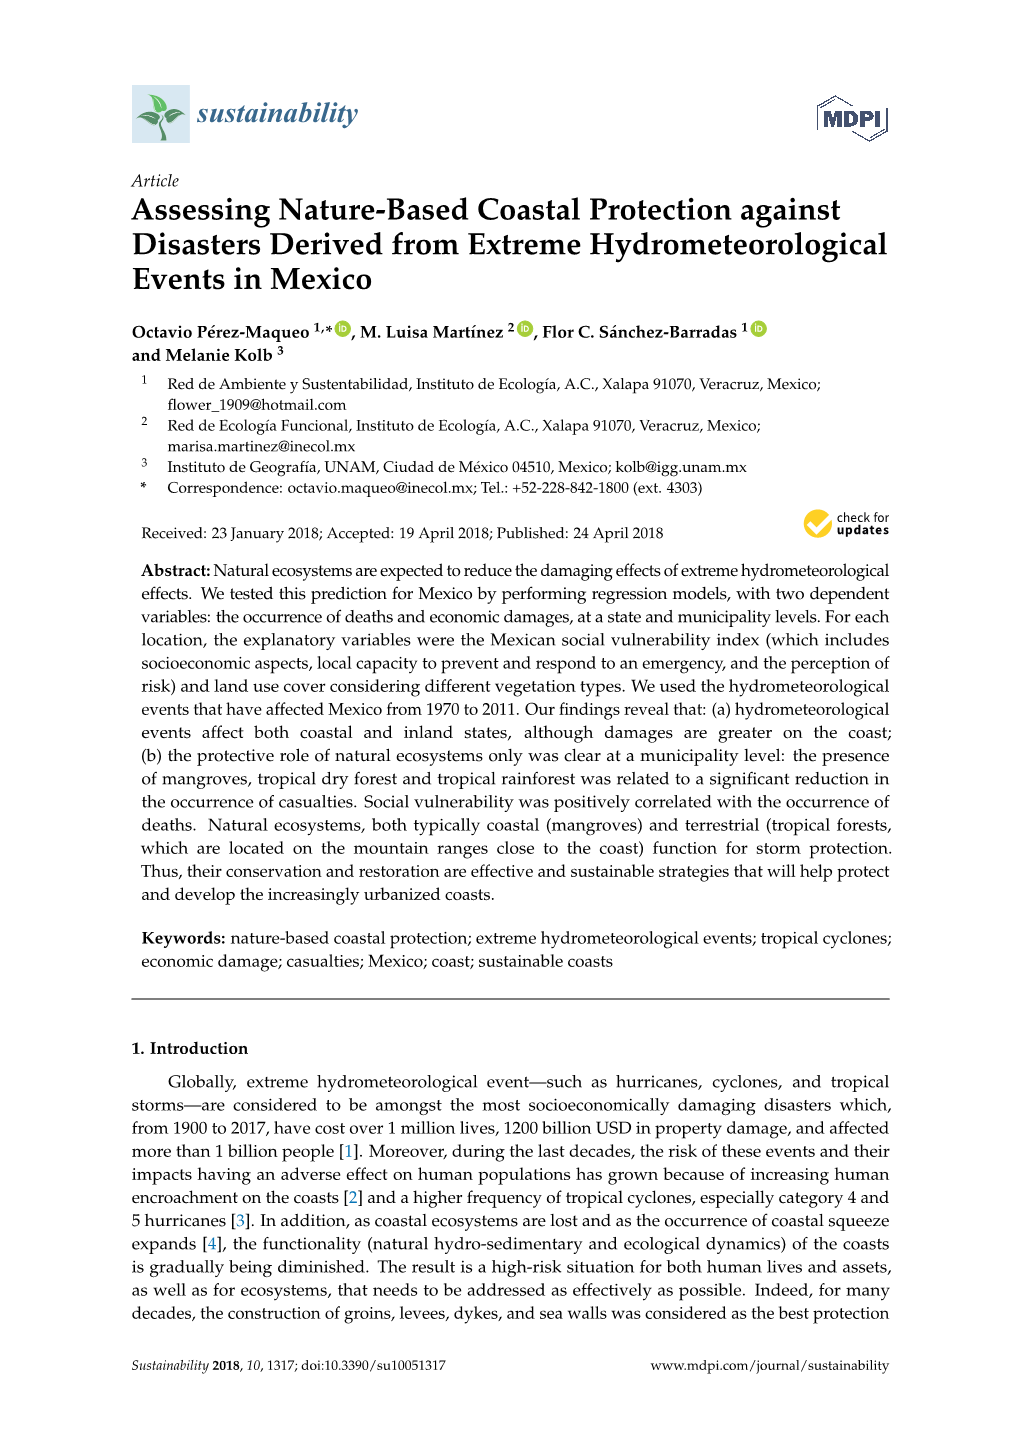 Assessing Nature-Based Coastal Protection Against Disasters Derived from Extreme Hydrometeorological Events in Mexico